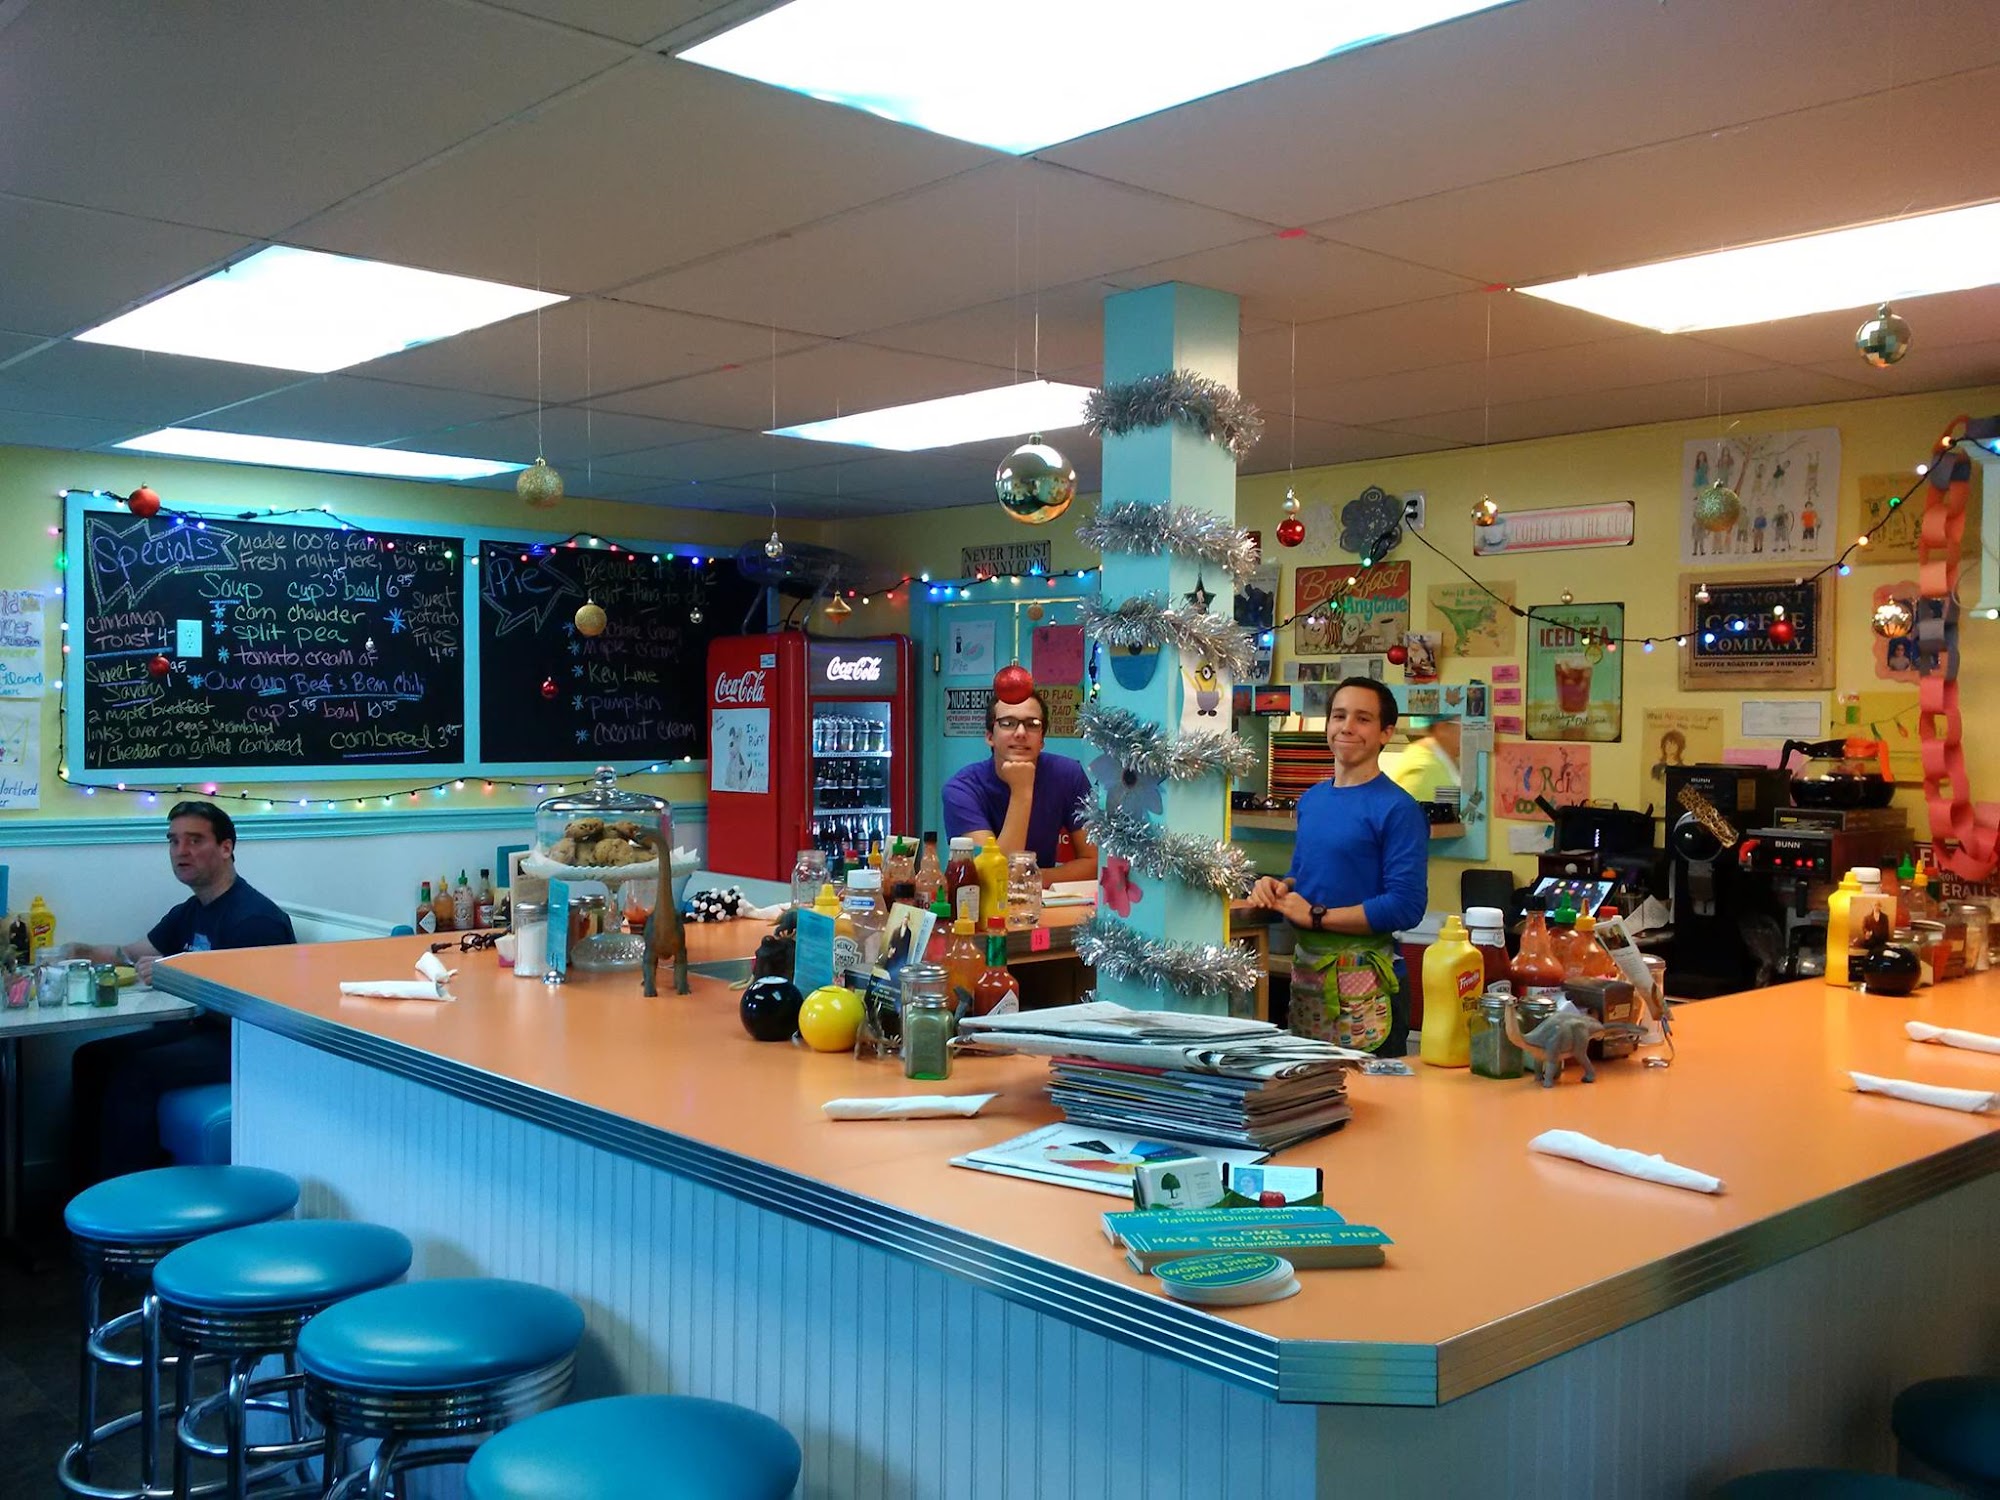 The Hartland Diner